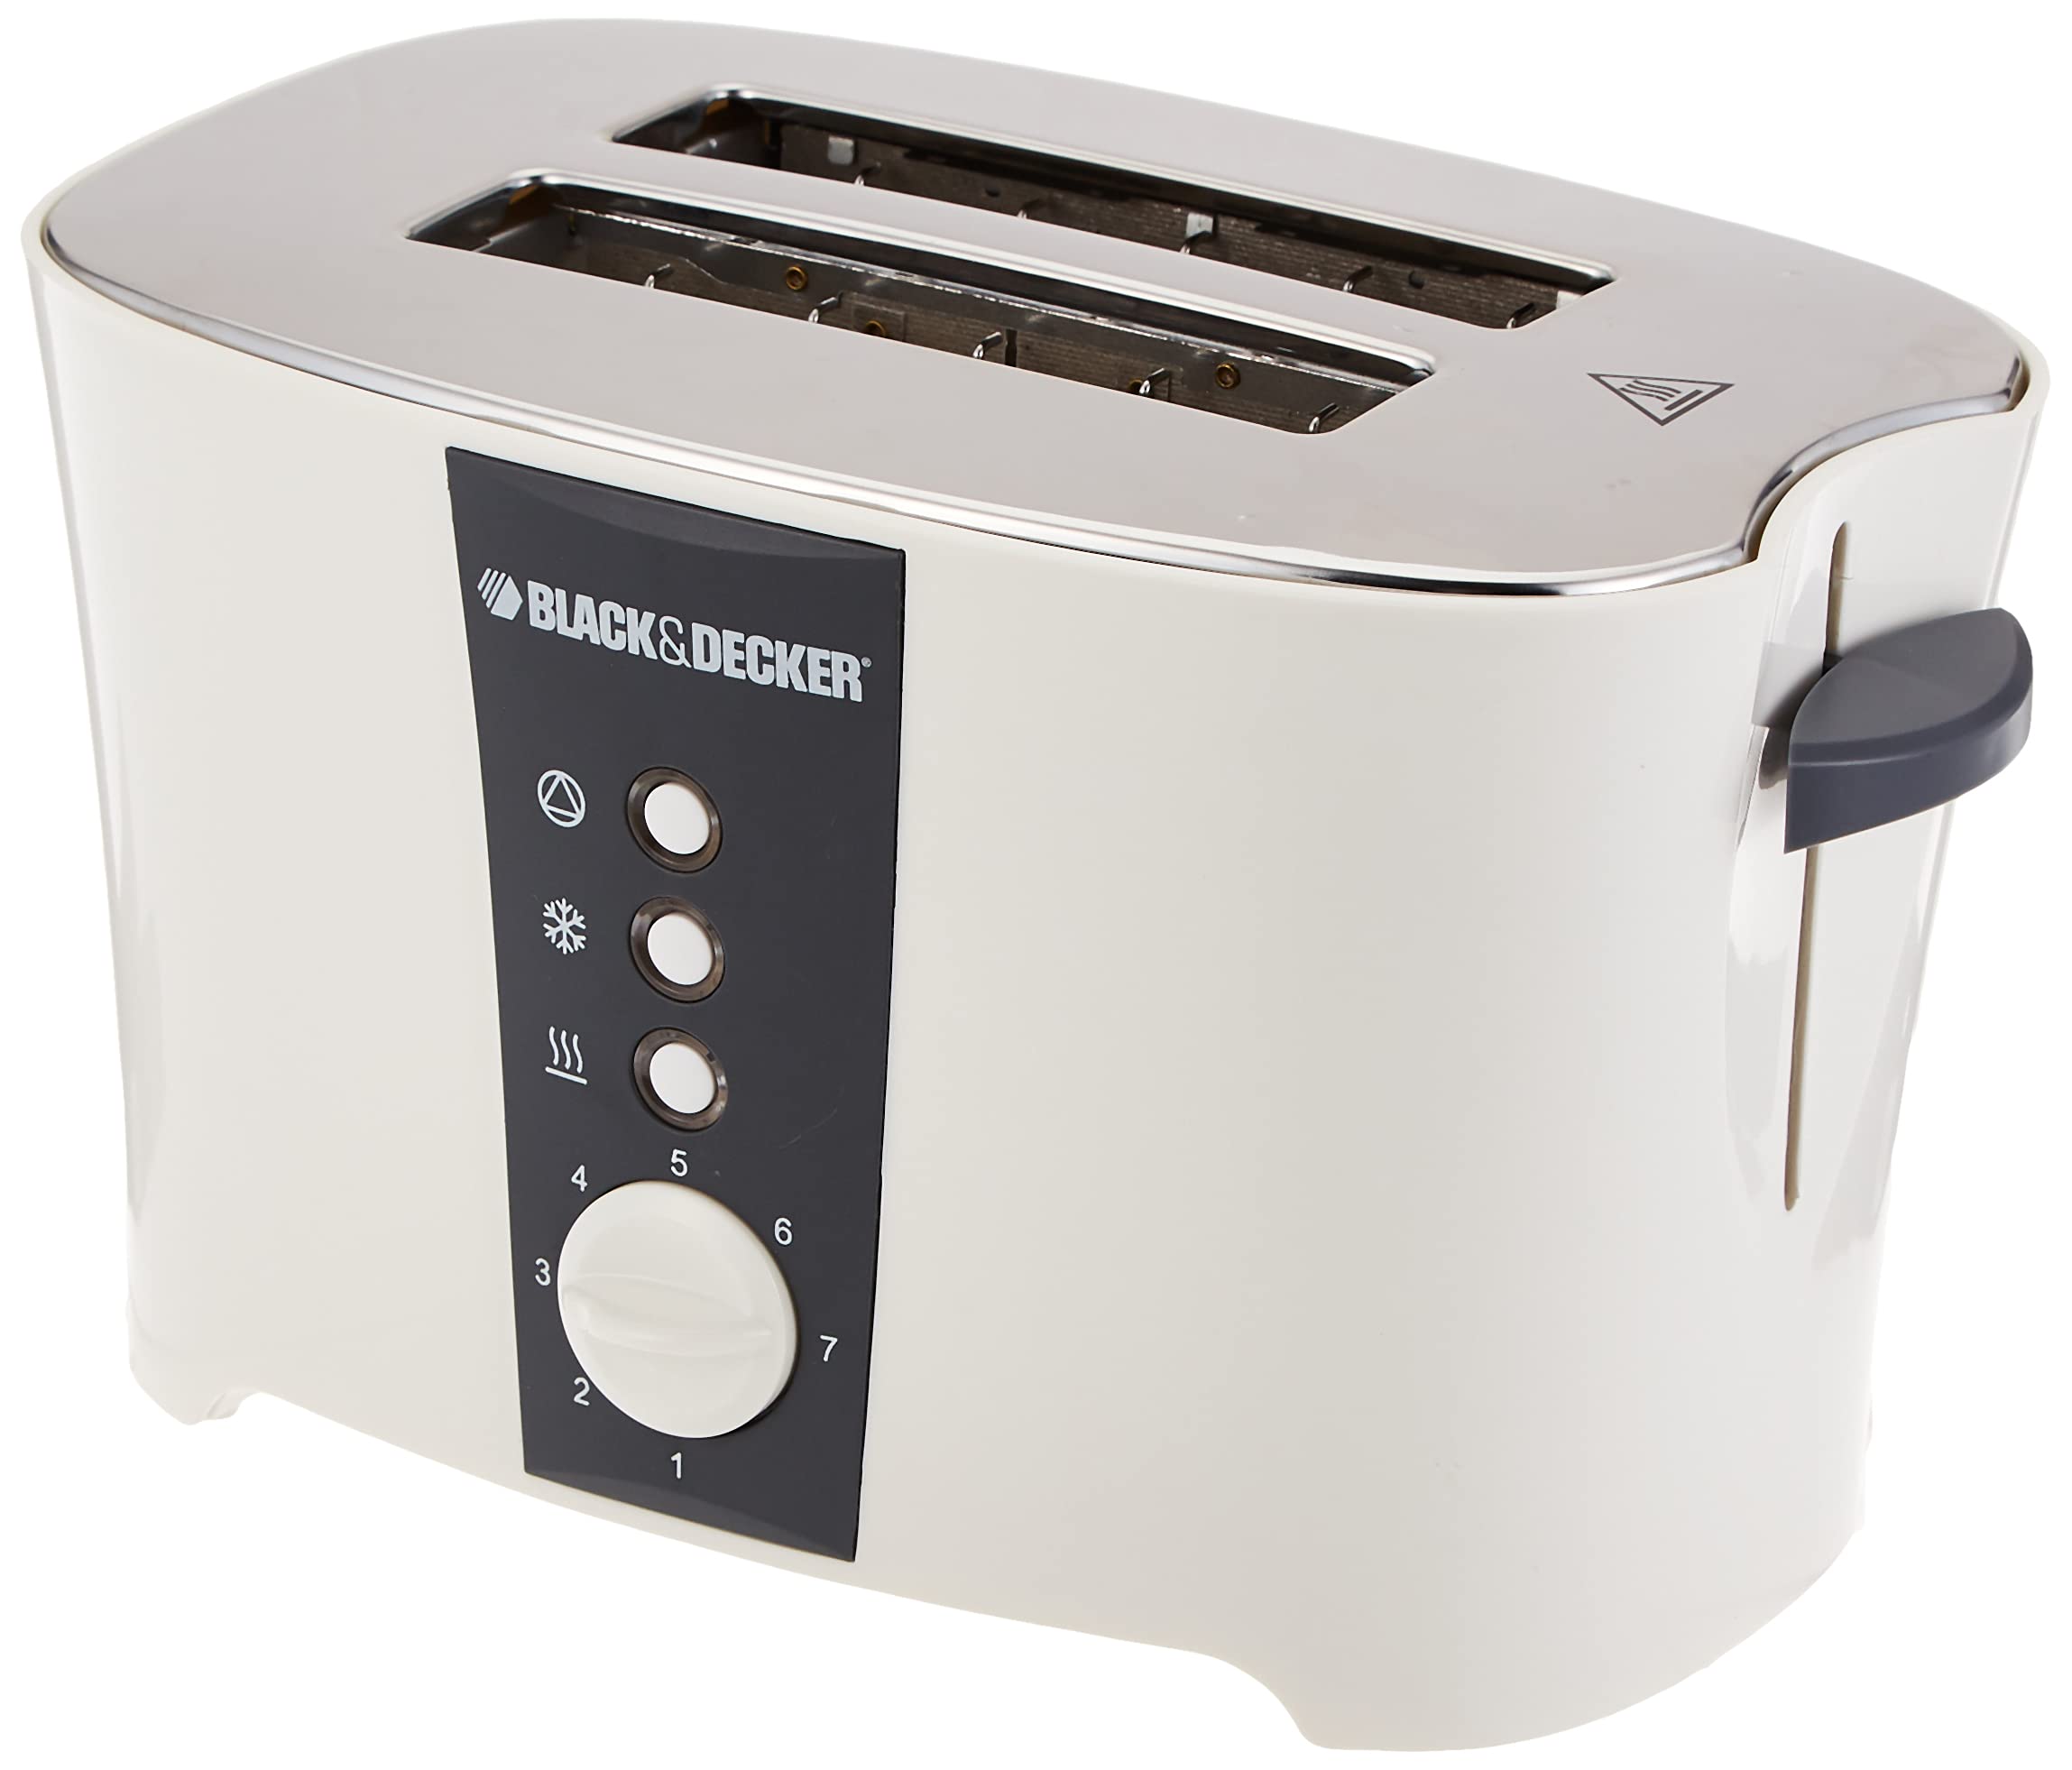 BLACK+DECKER 800W Toaster 2 Slice Browning Control with Frozen Reheat, Cancel Functions And Cool Touch White, For Perfect Toasts Everyday 1 Year Warranty